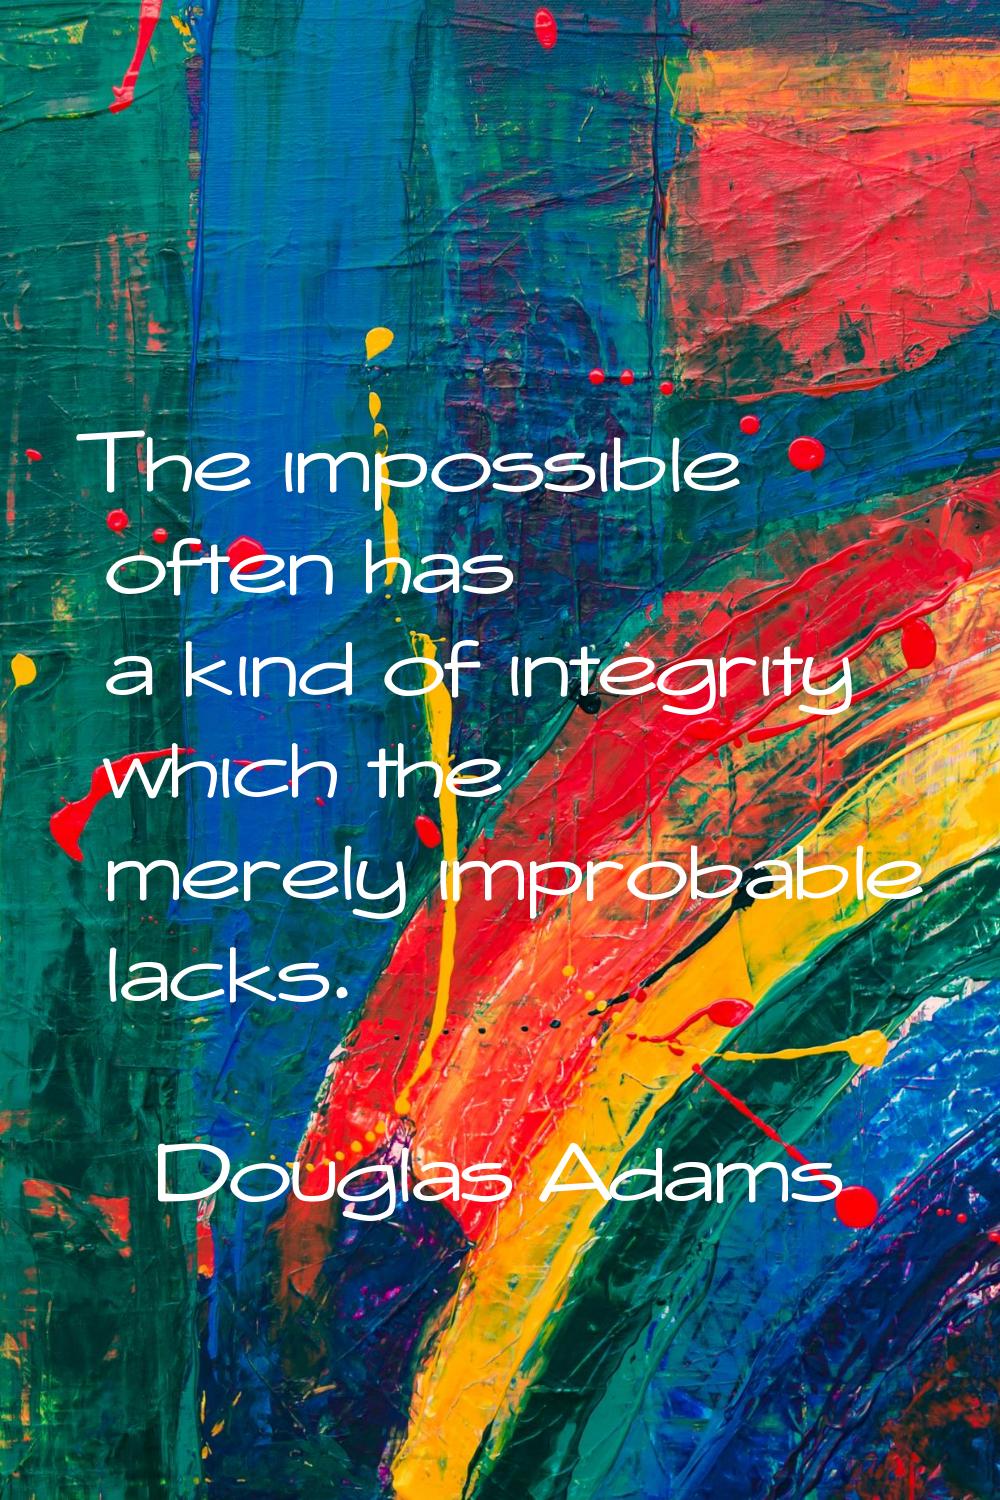 The impossible often has a kind of integrity which the merely improbable lacks.